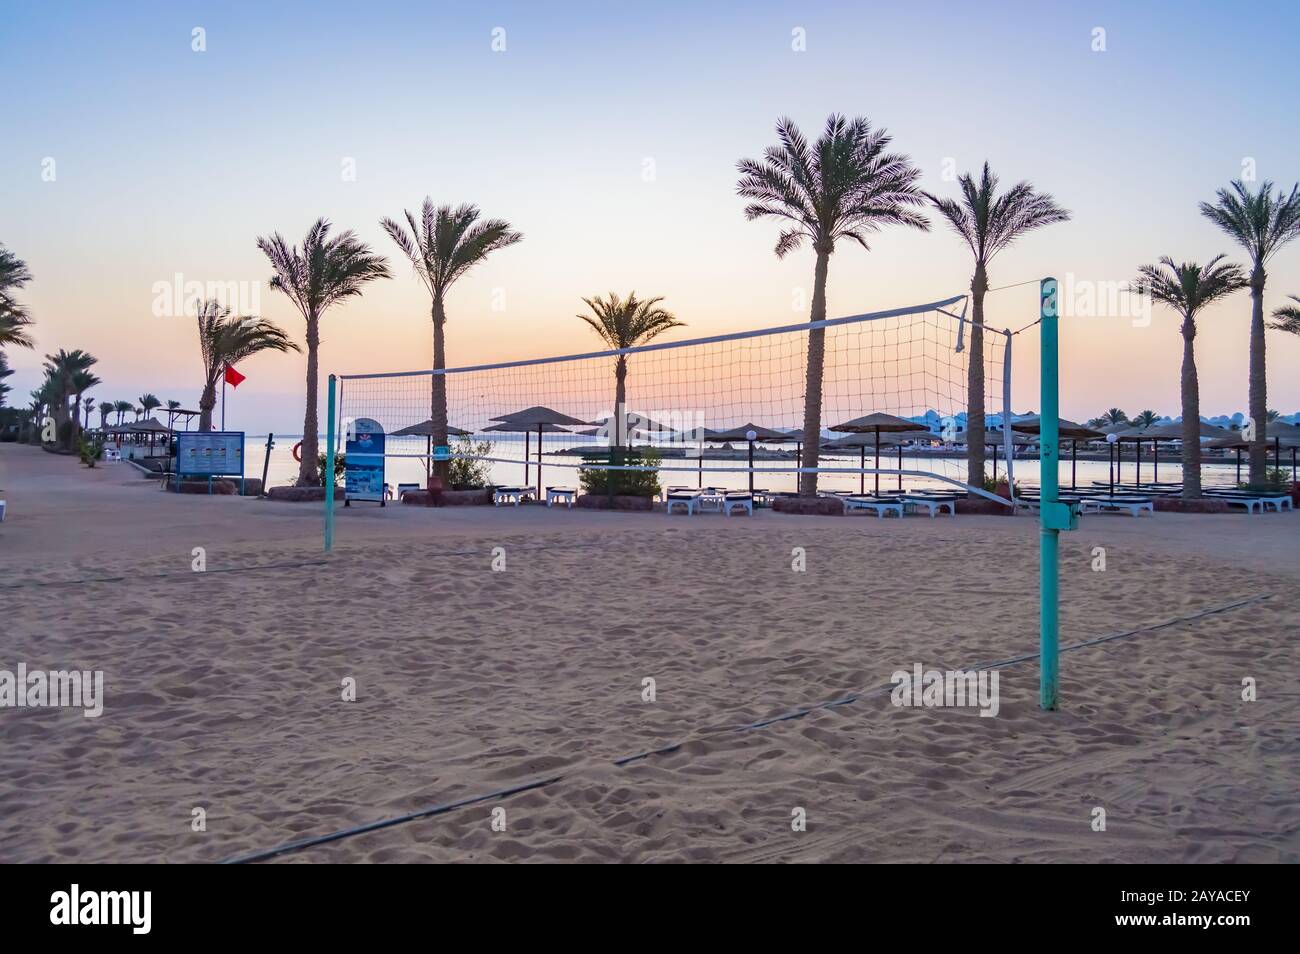 Beach volleyball field on a red sea beach Stock Photo